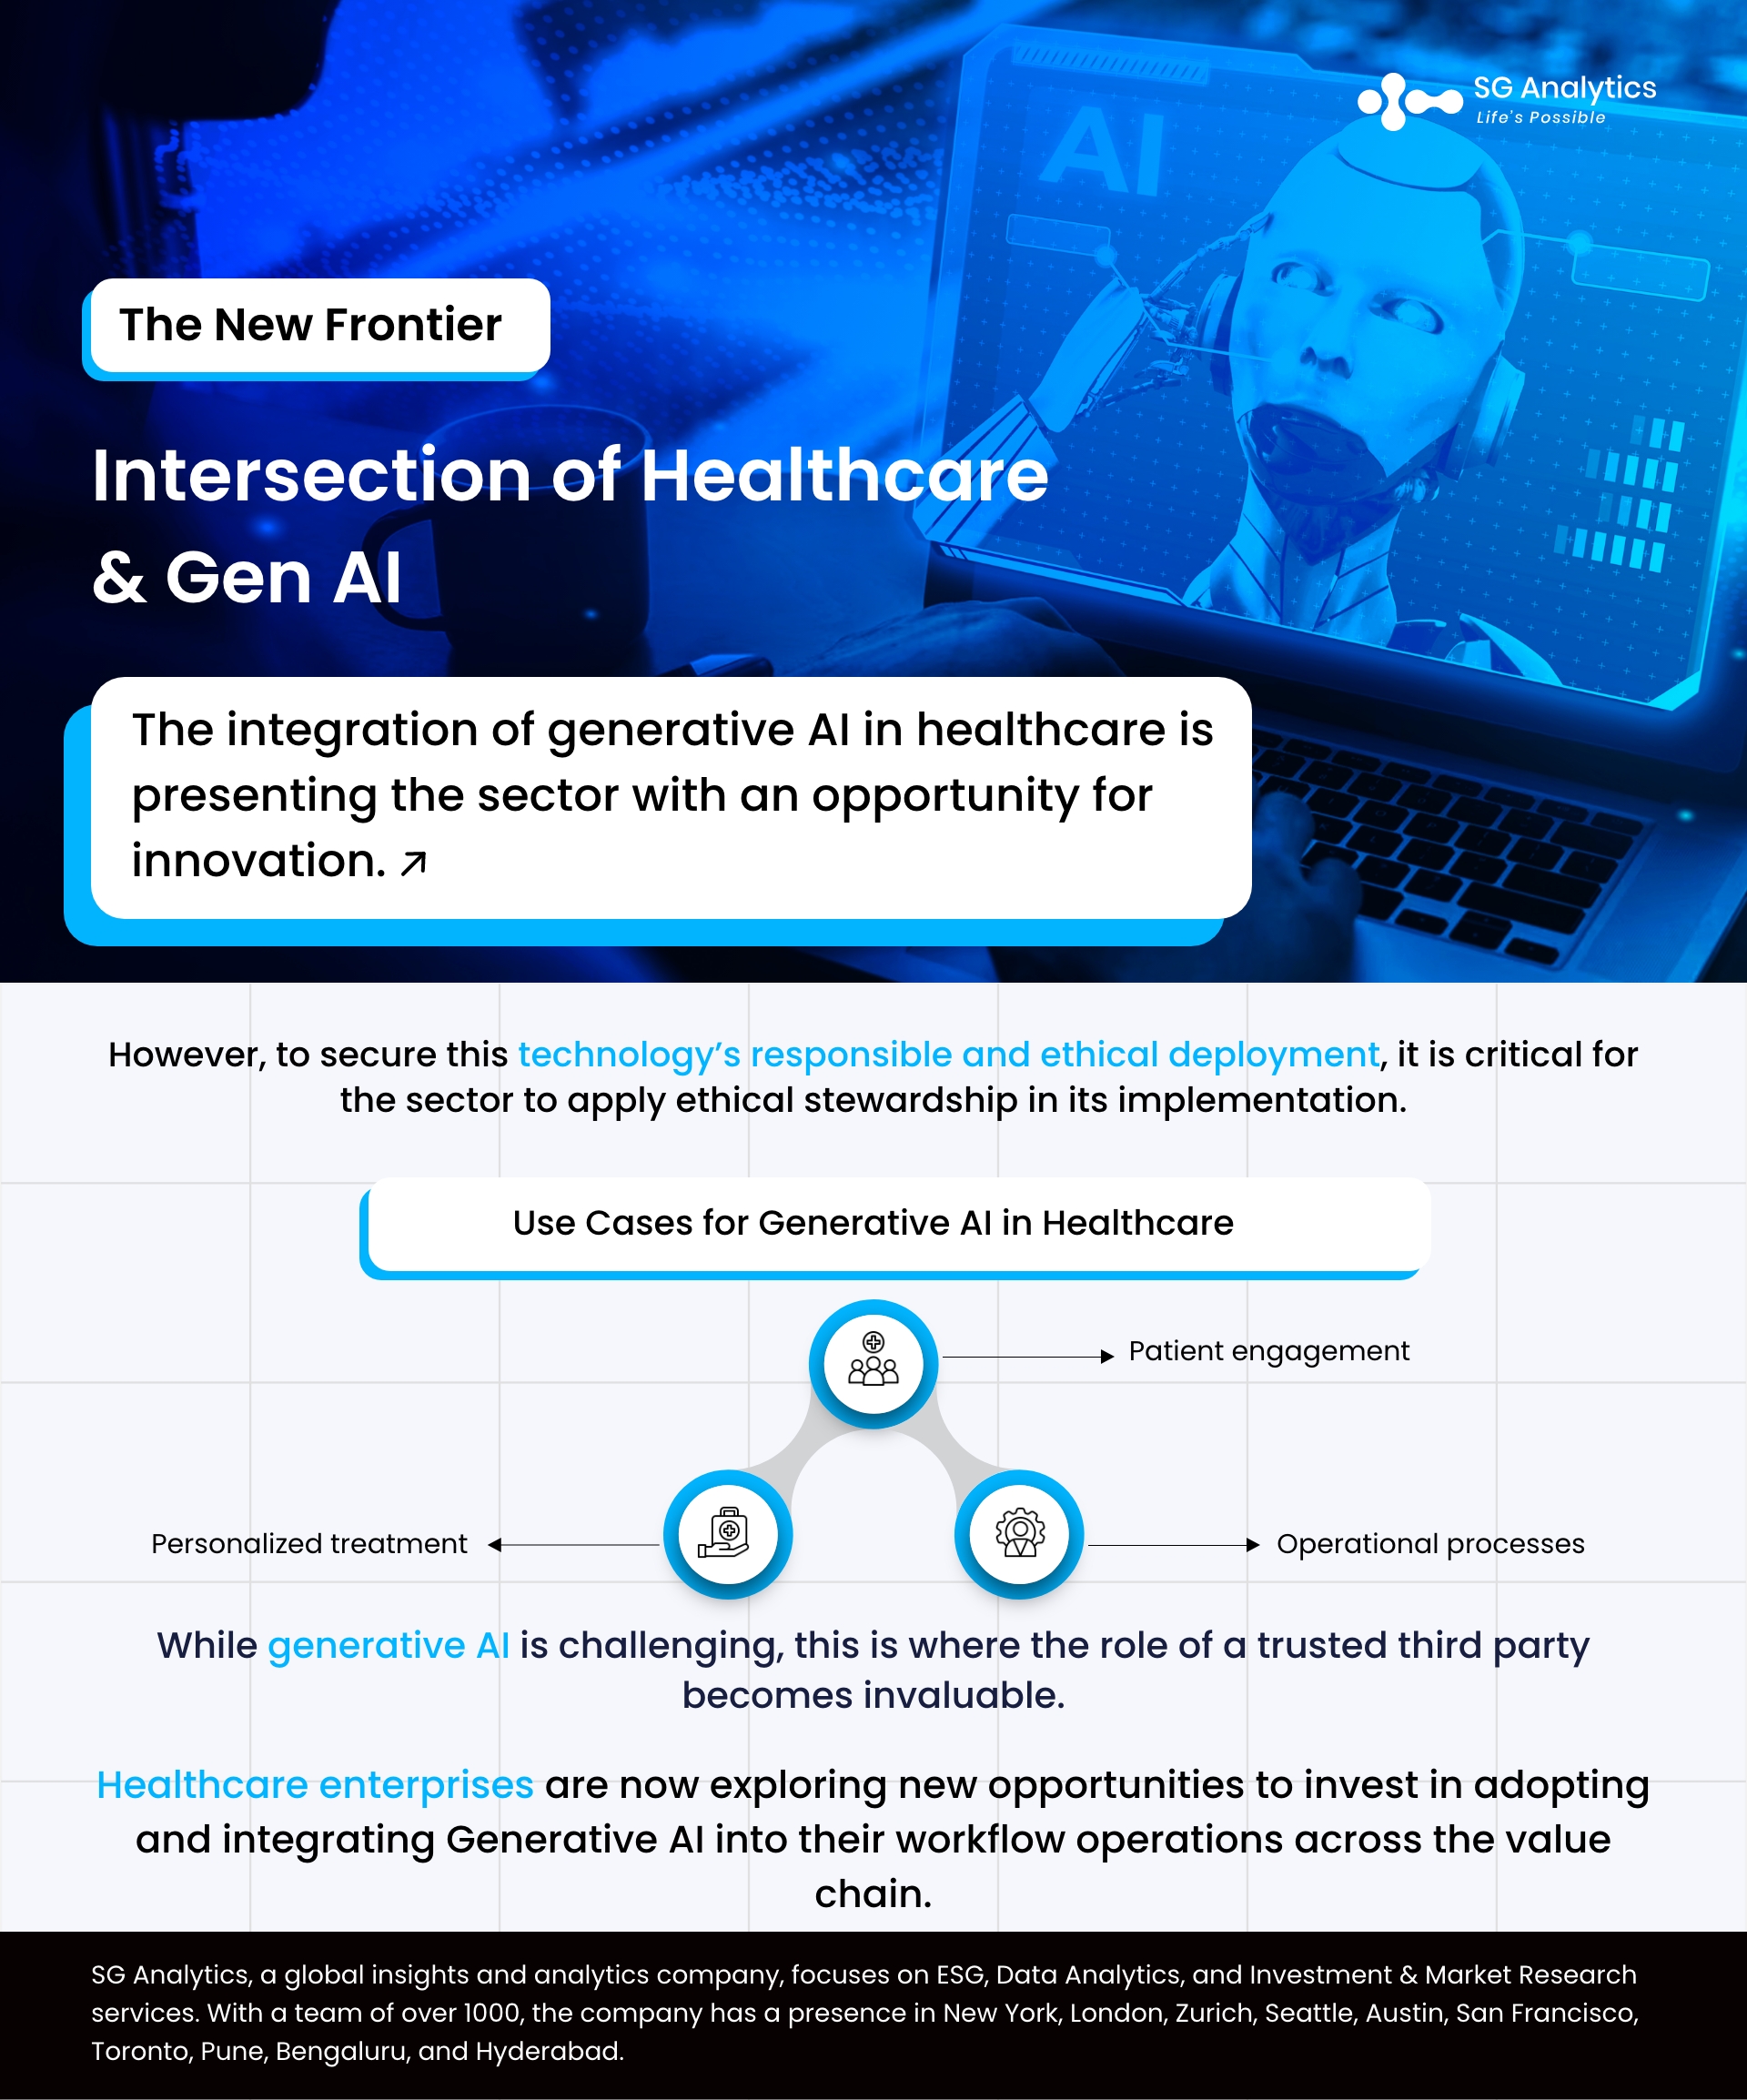 Intersection of Healthcare & Gen AI